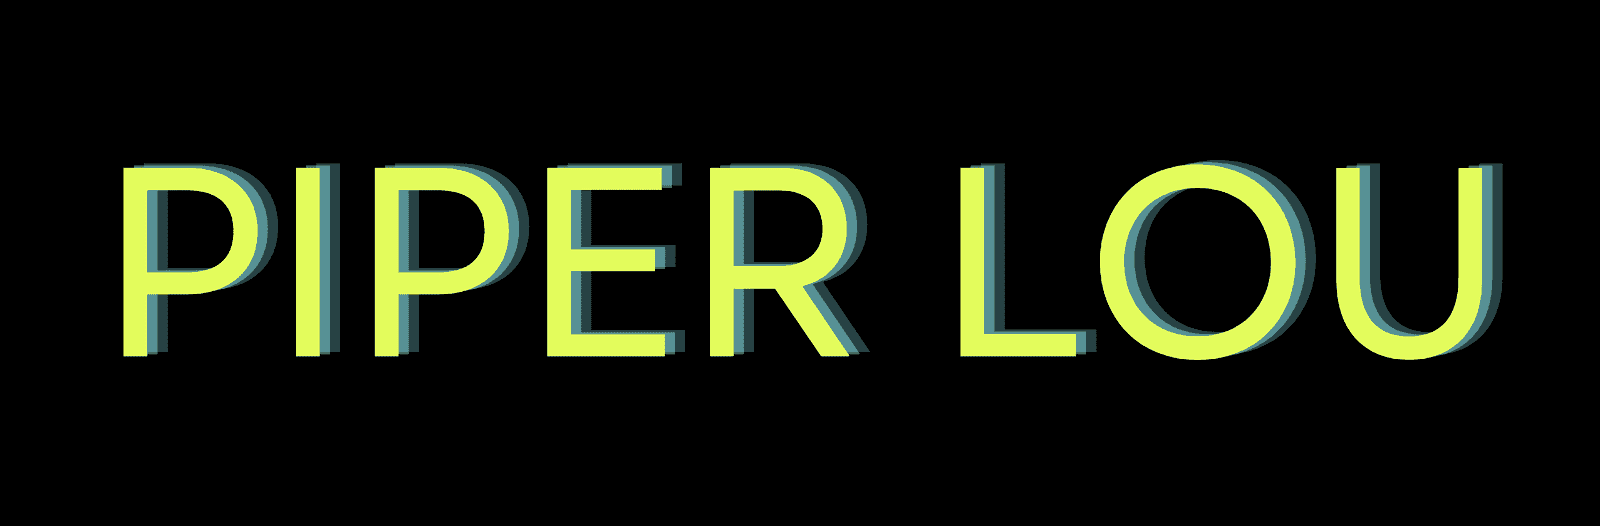 PIper Lou Logo image in neon yellow and teal